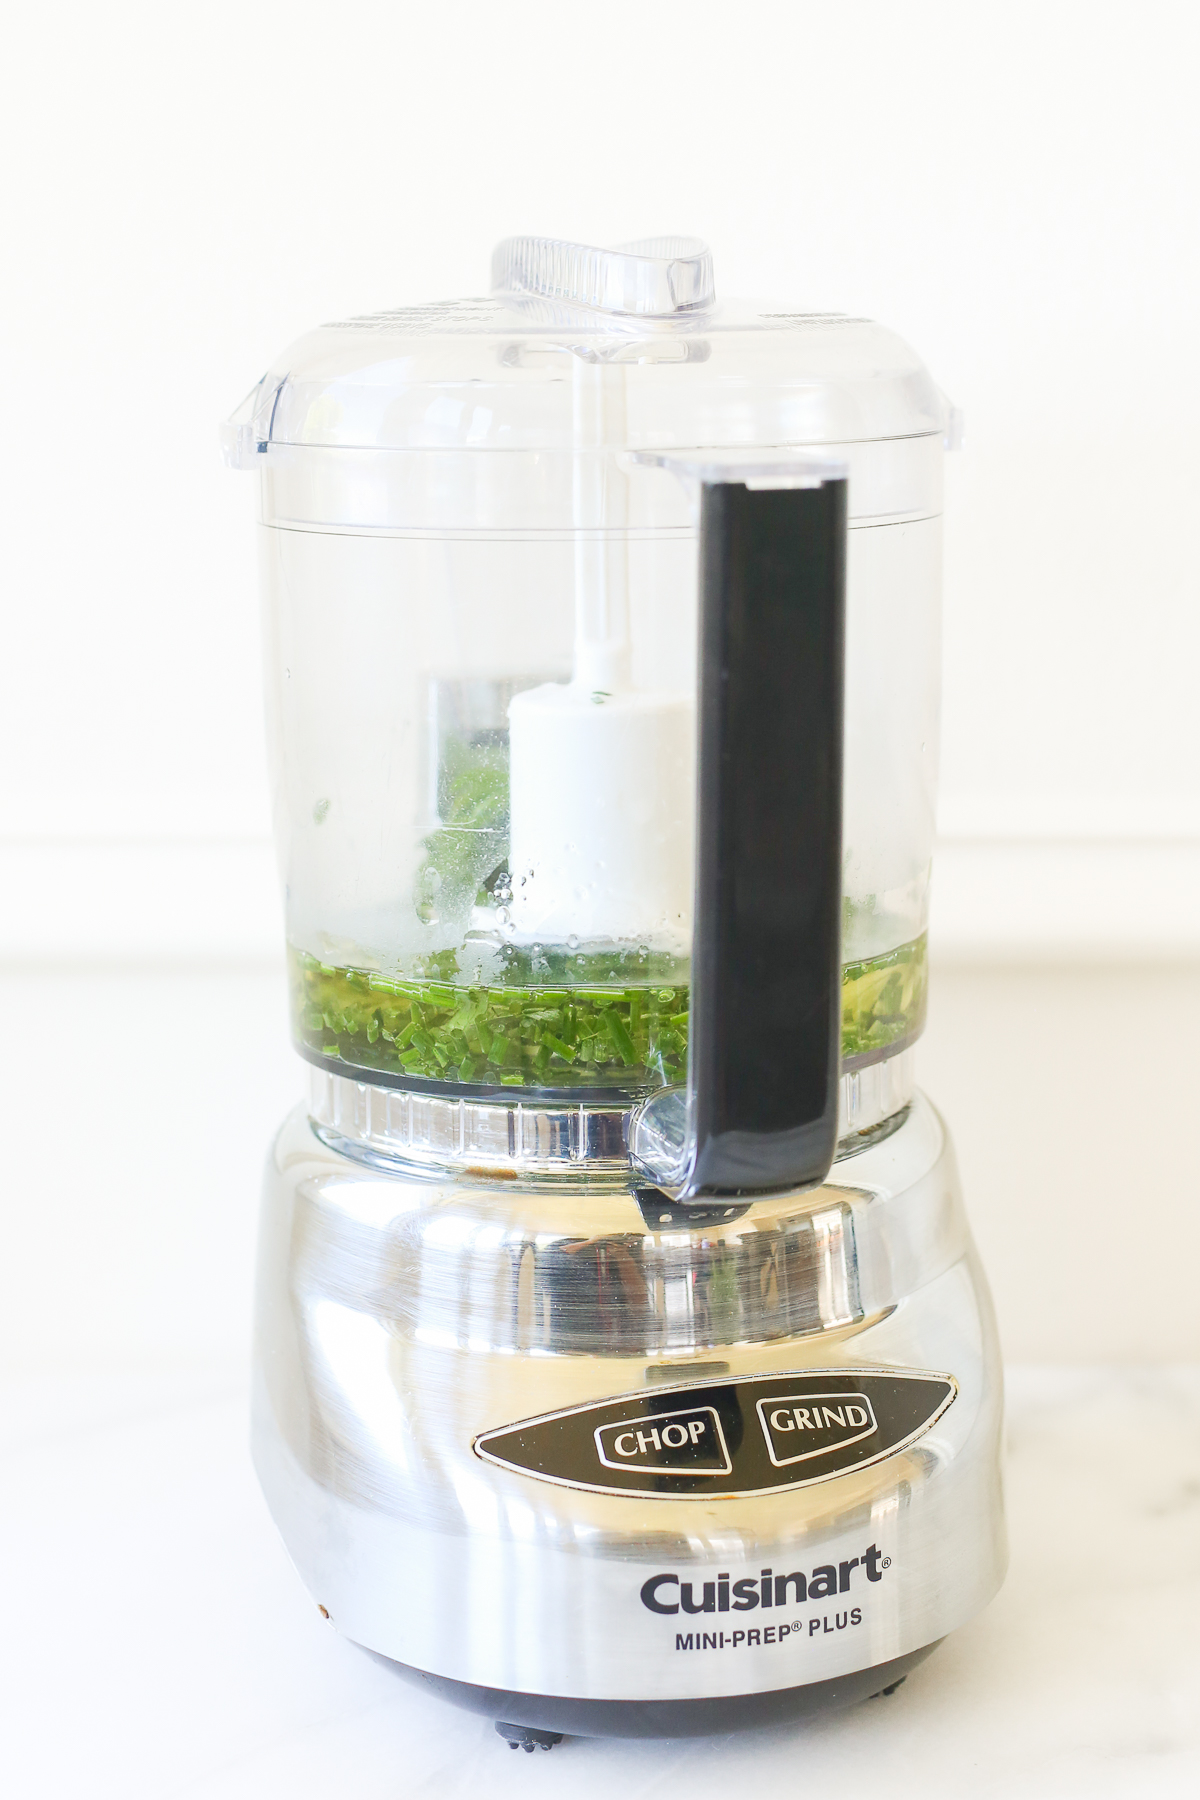 A kitchen gift that includes a food processor with greens in it.